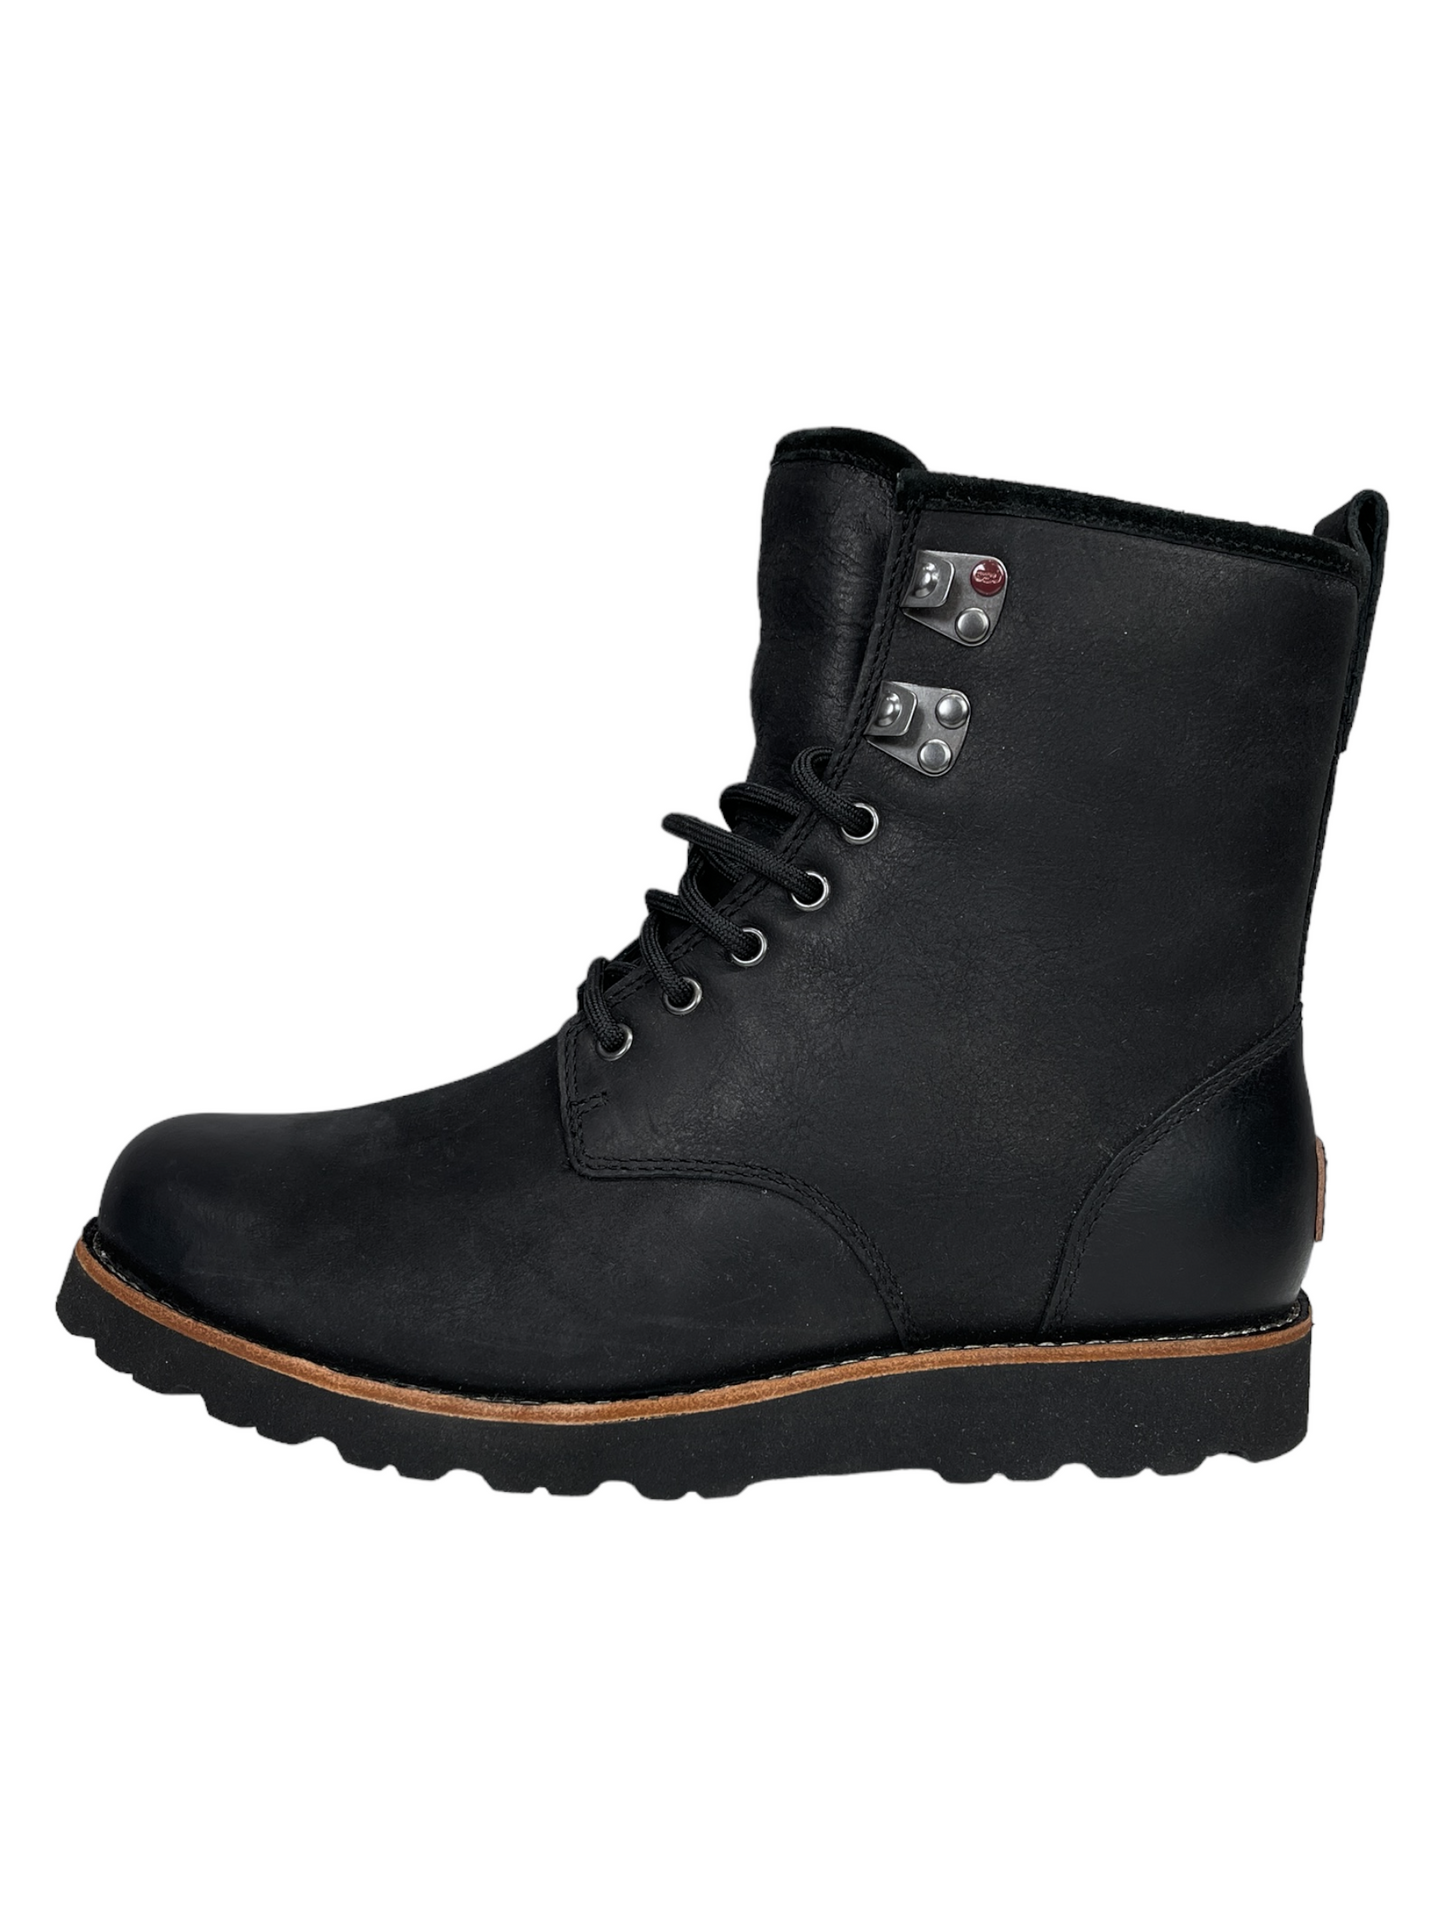 UGG Black Leather Winter Boot 8 US- Genuine Design Luxury Consignment Calgary, Alberta, Canada New and Pre-Owned Clothing, Shoes, Accessories.